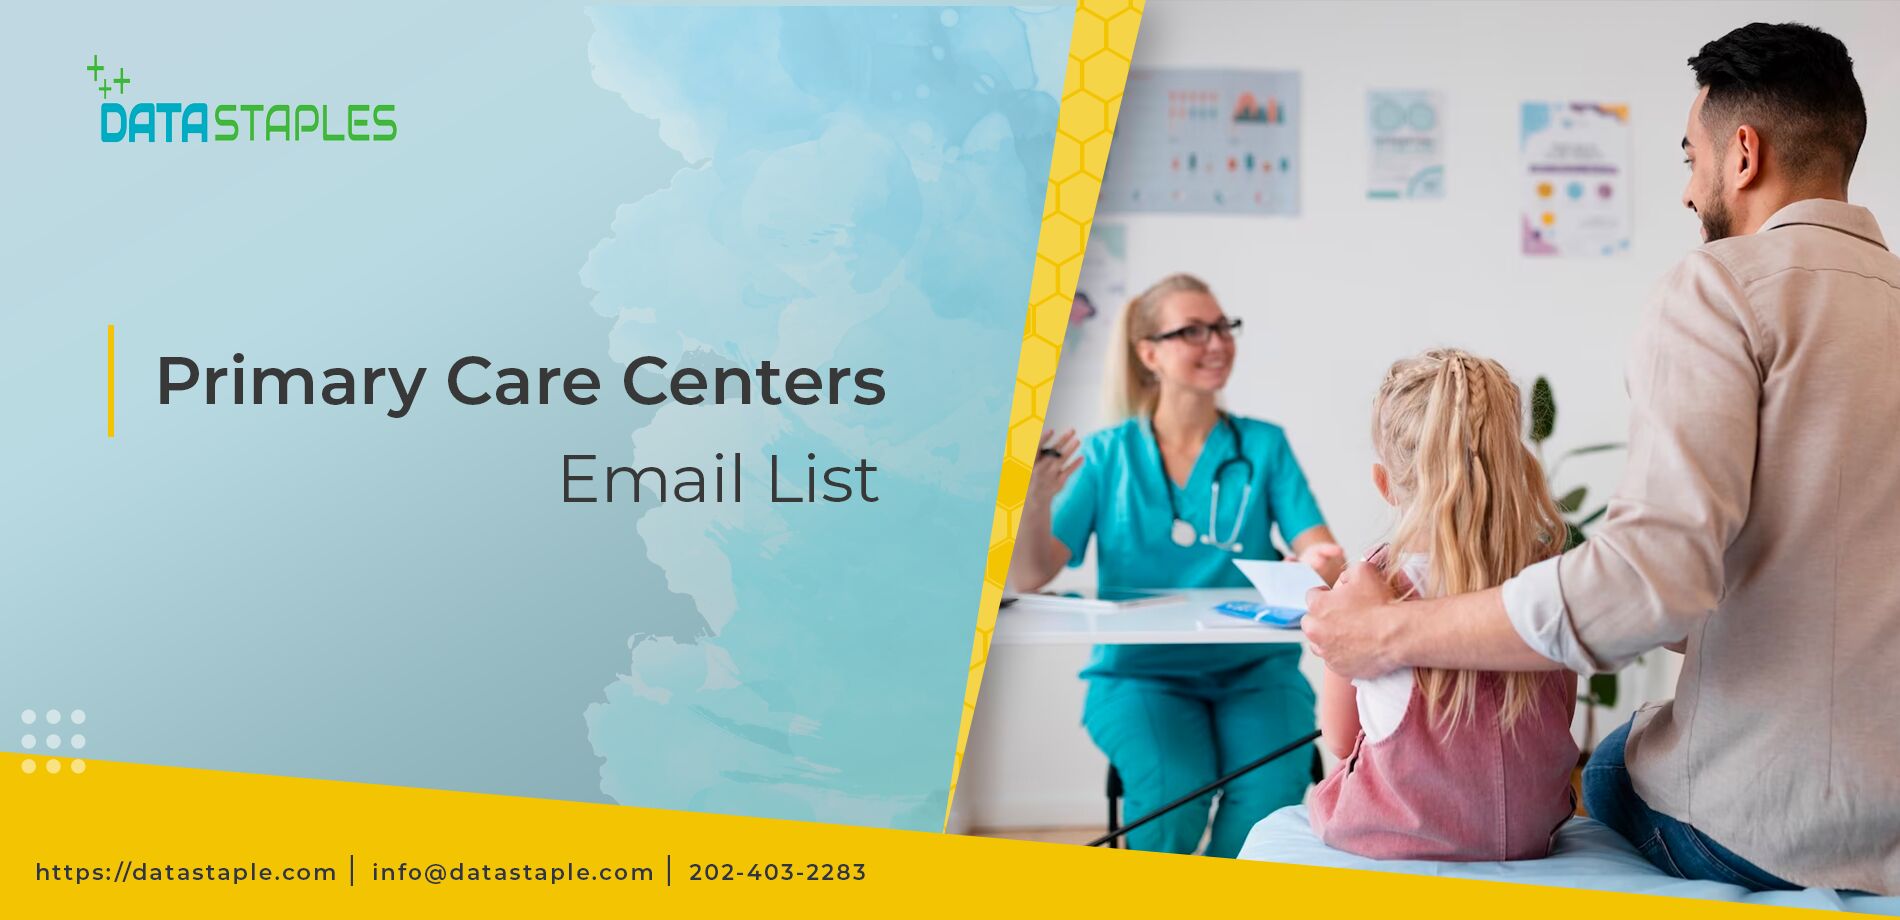 Primary Care Centers Email List | DataStaples